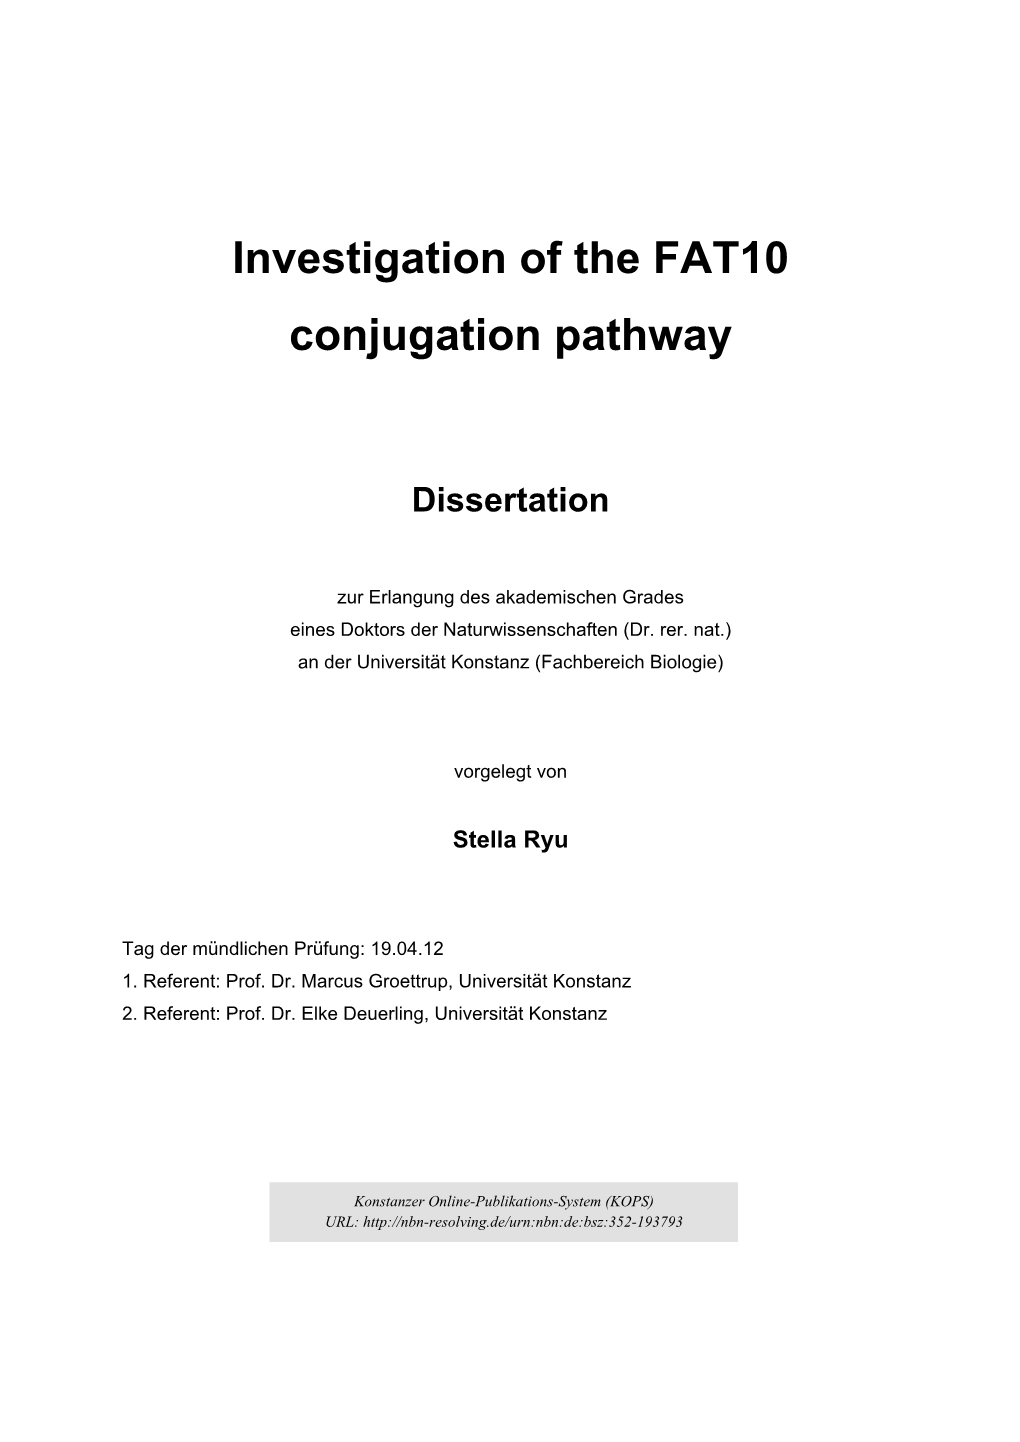 Investigation of the FAT10 Conjugation Pathway